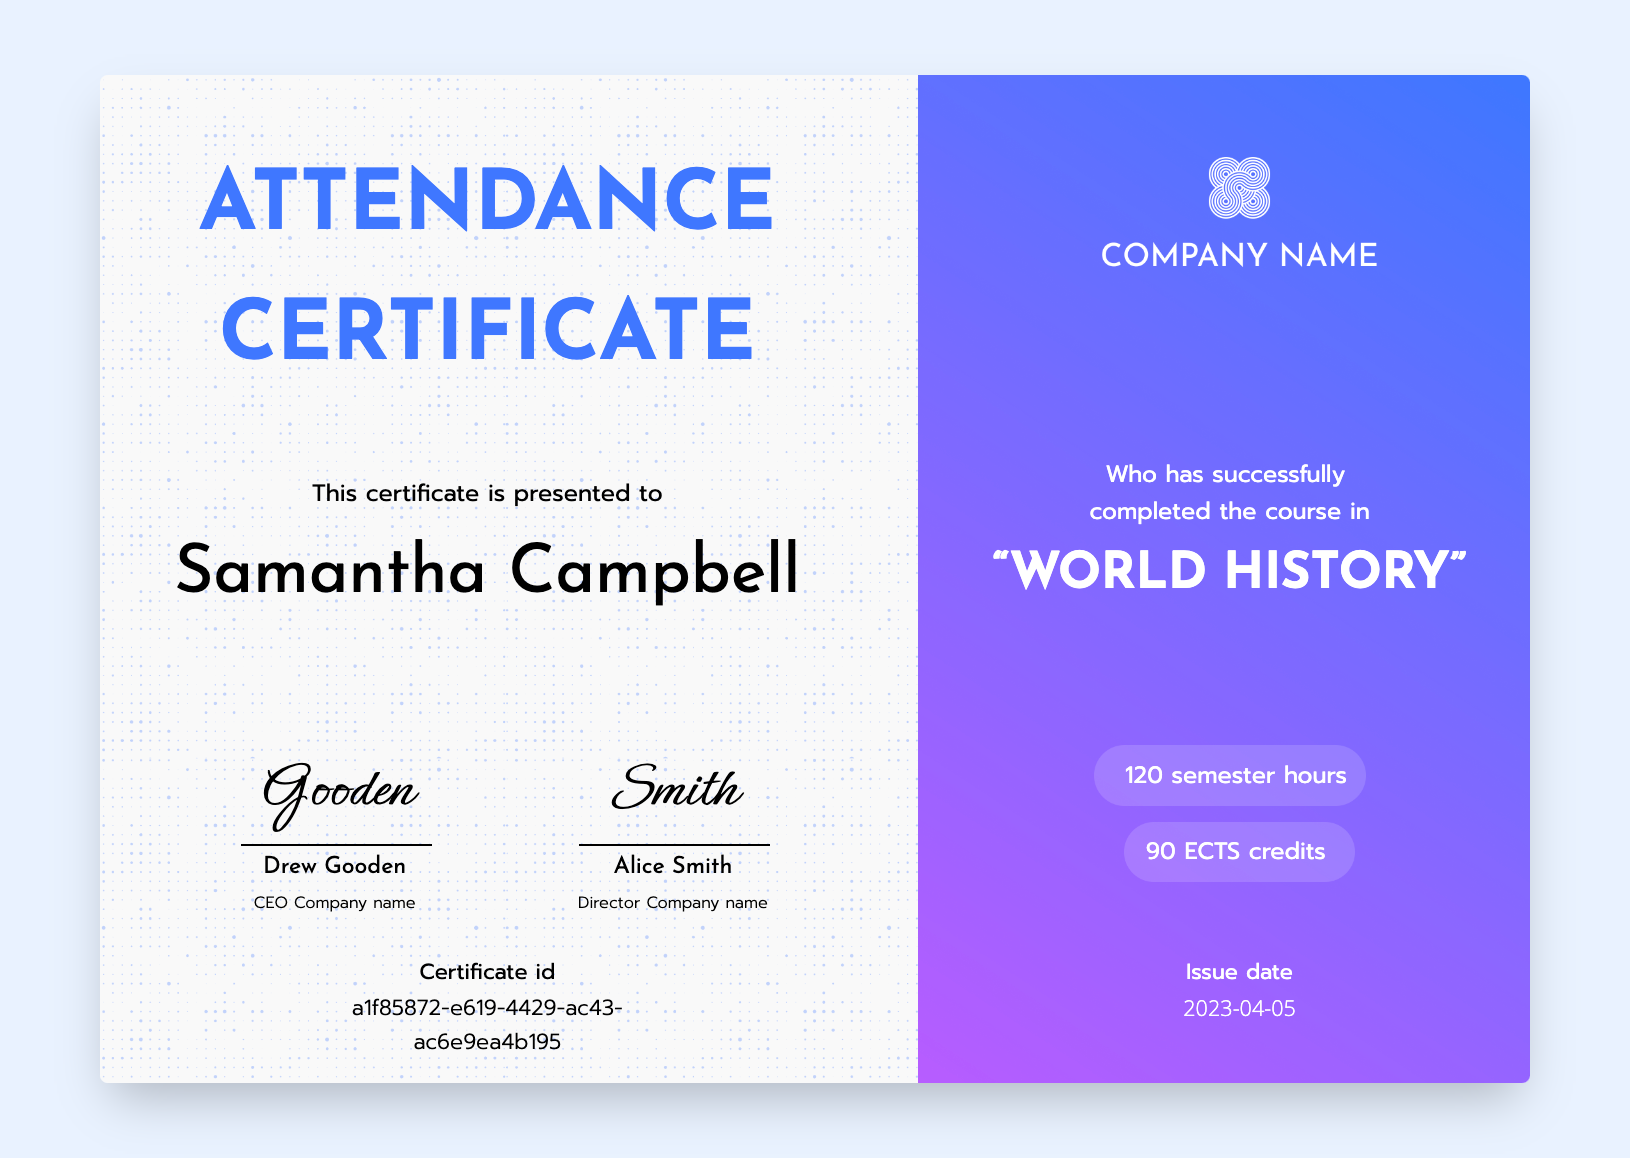 Certificate Printing – How to Prepare Design for Print [5 Steps]